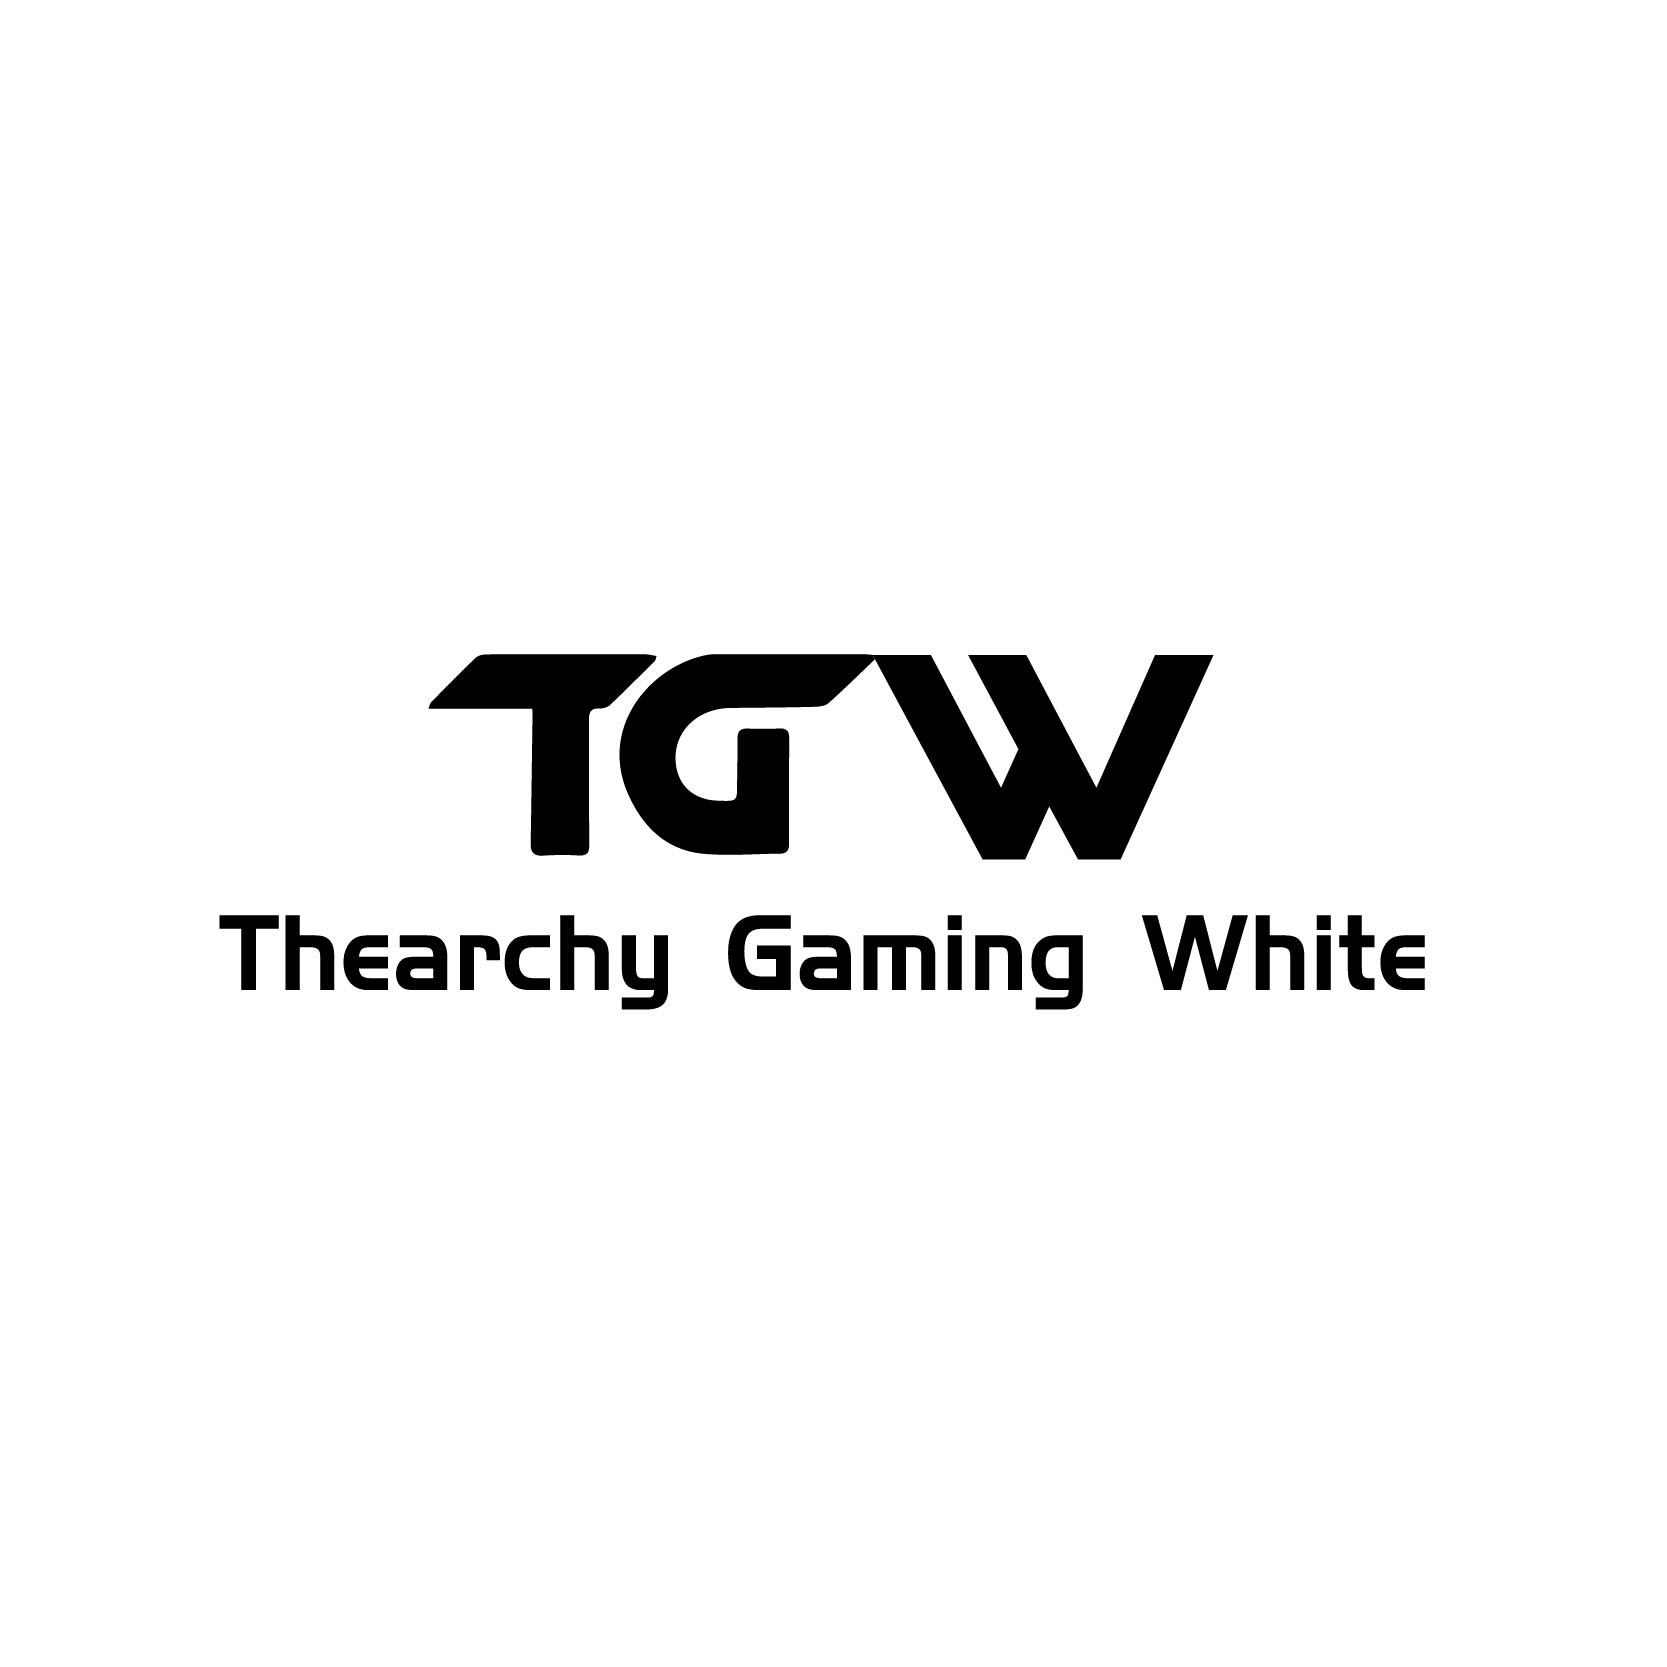 Thearchy Gaming White